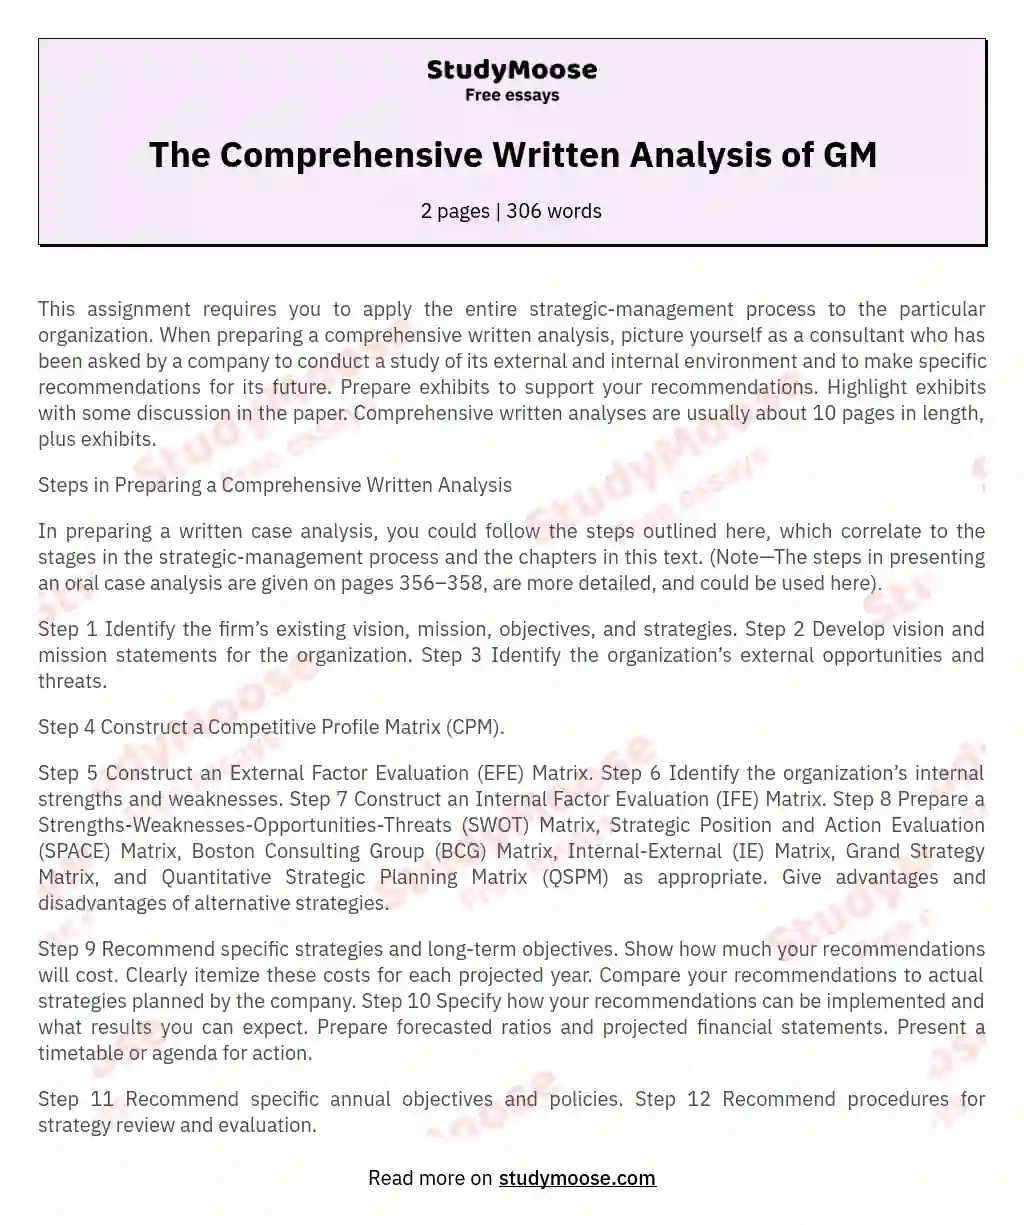 The Comprehensive Written Analysis of GM essay